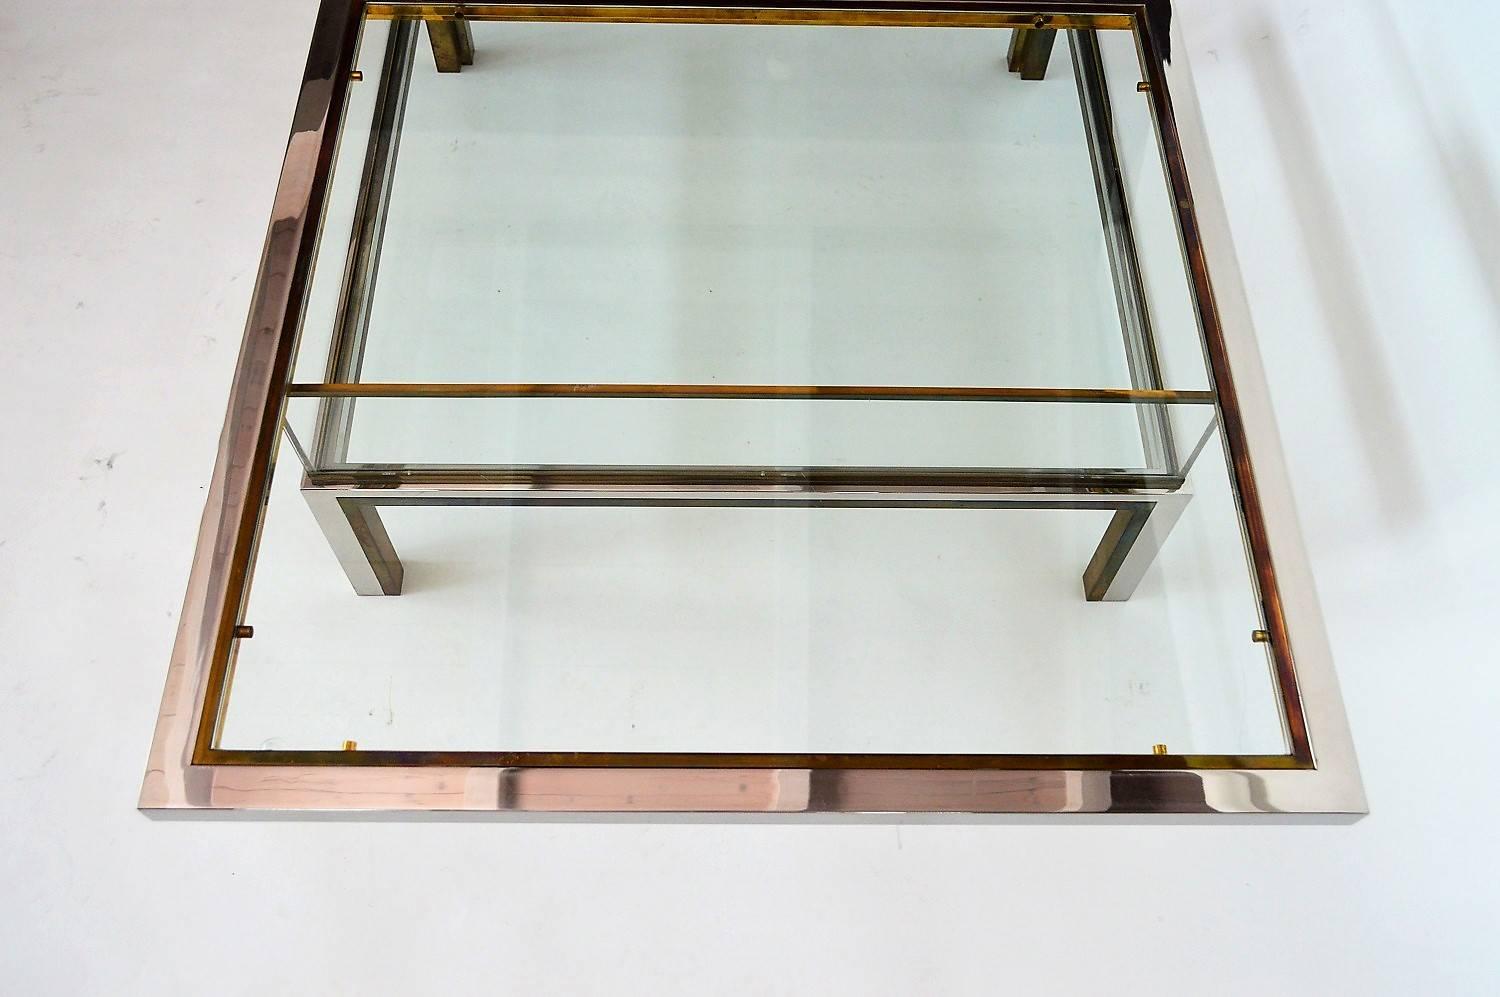 Late 20th Century Regency Brass and Chrome Coffee Table with Sliding Display Case, France, 1970s